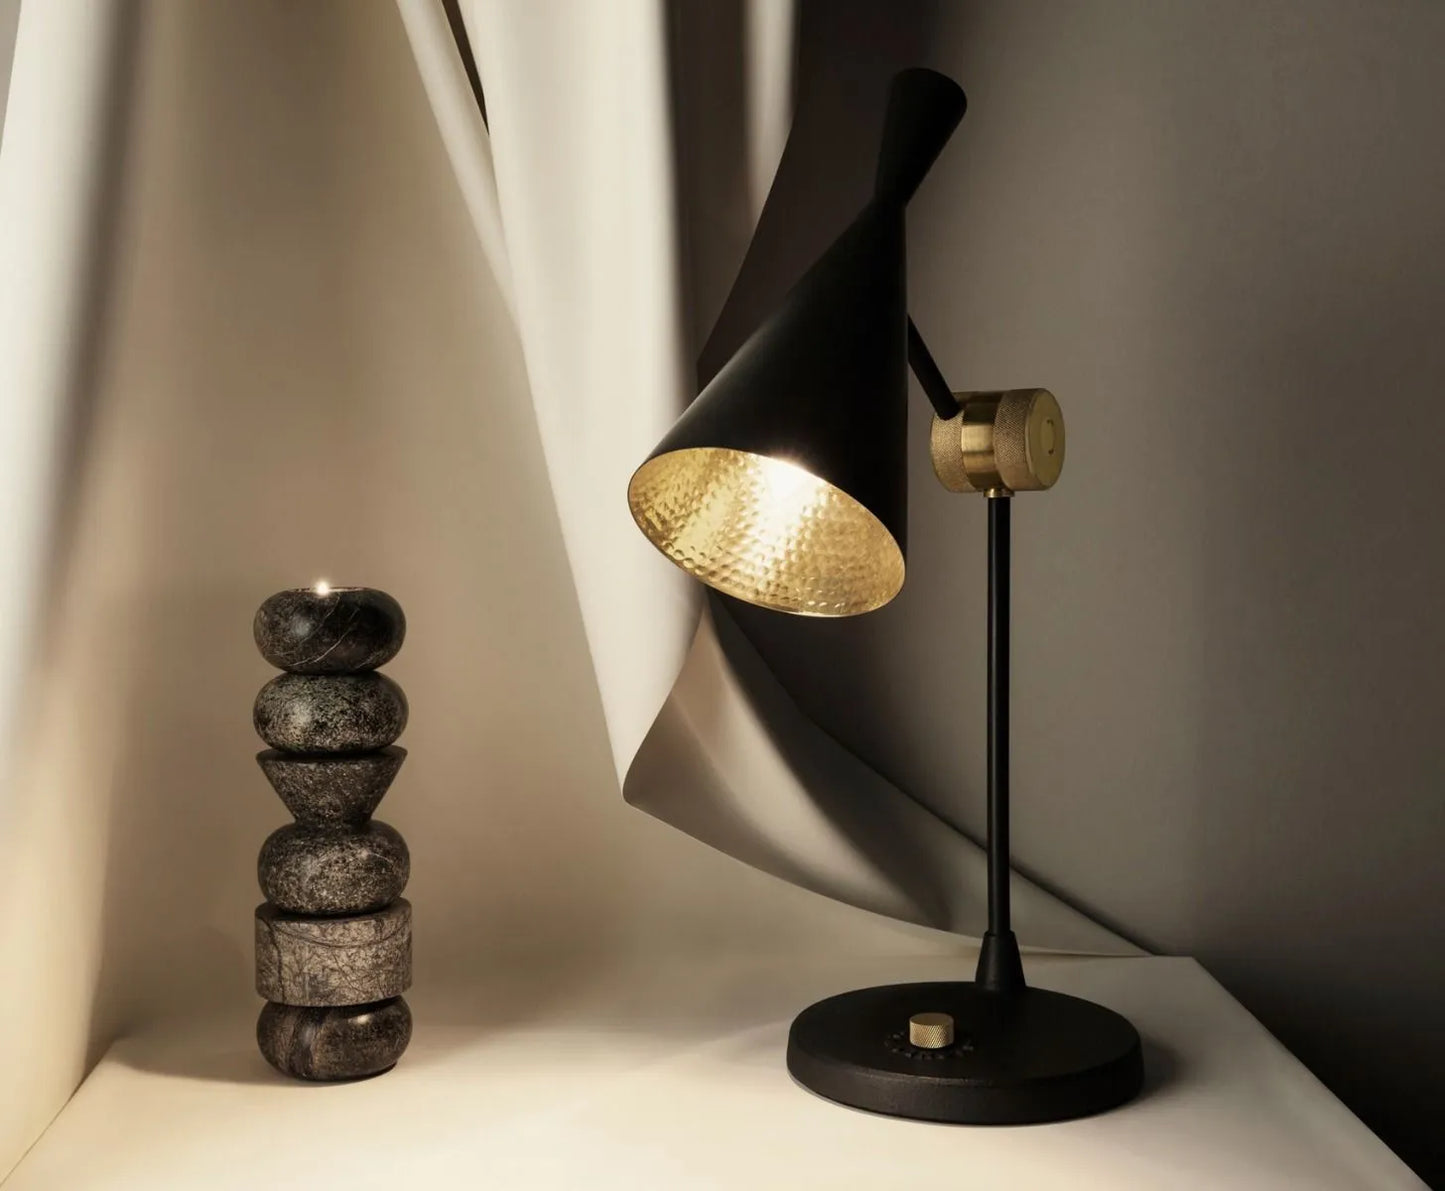 Bedroom Indian touch  Brass table lamp by hand beaten texture